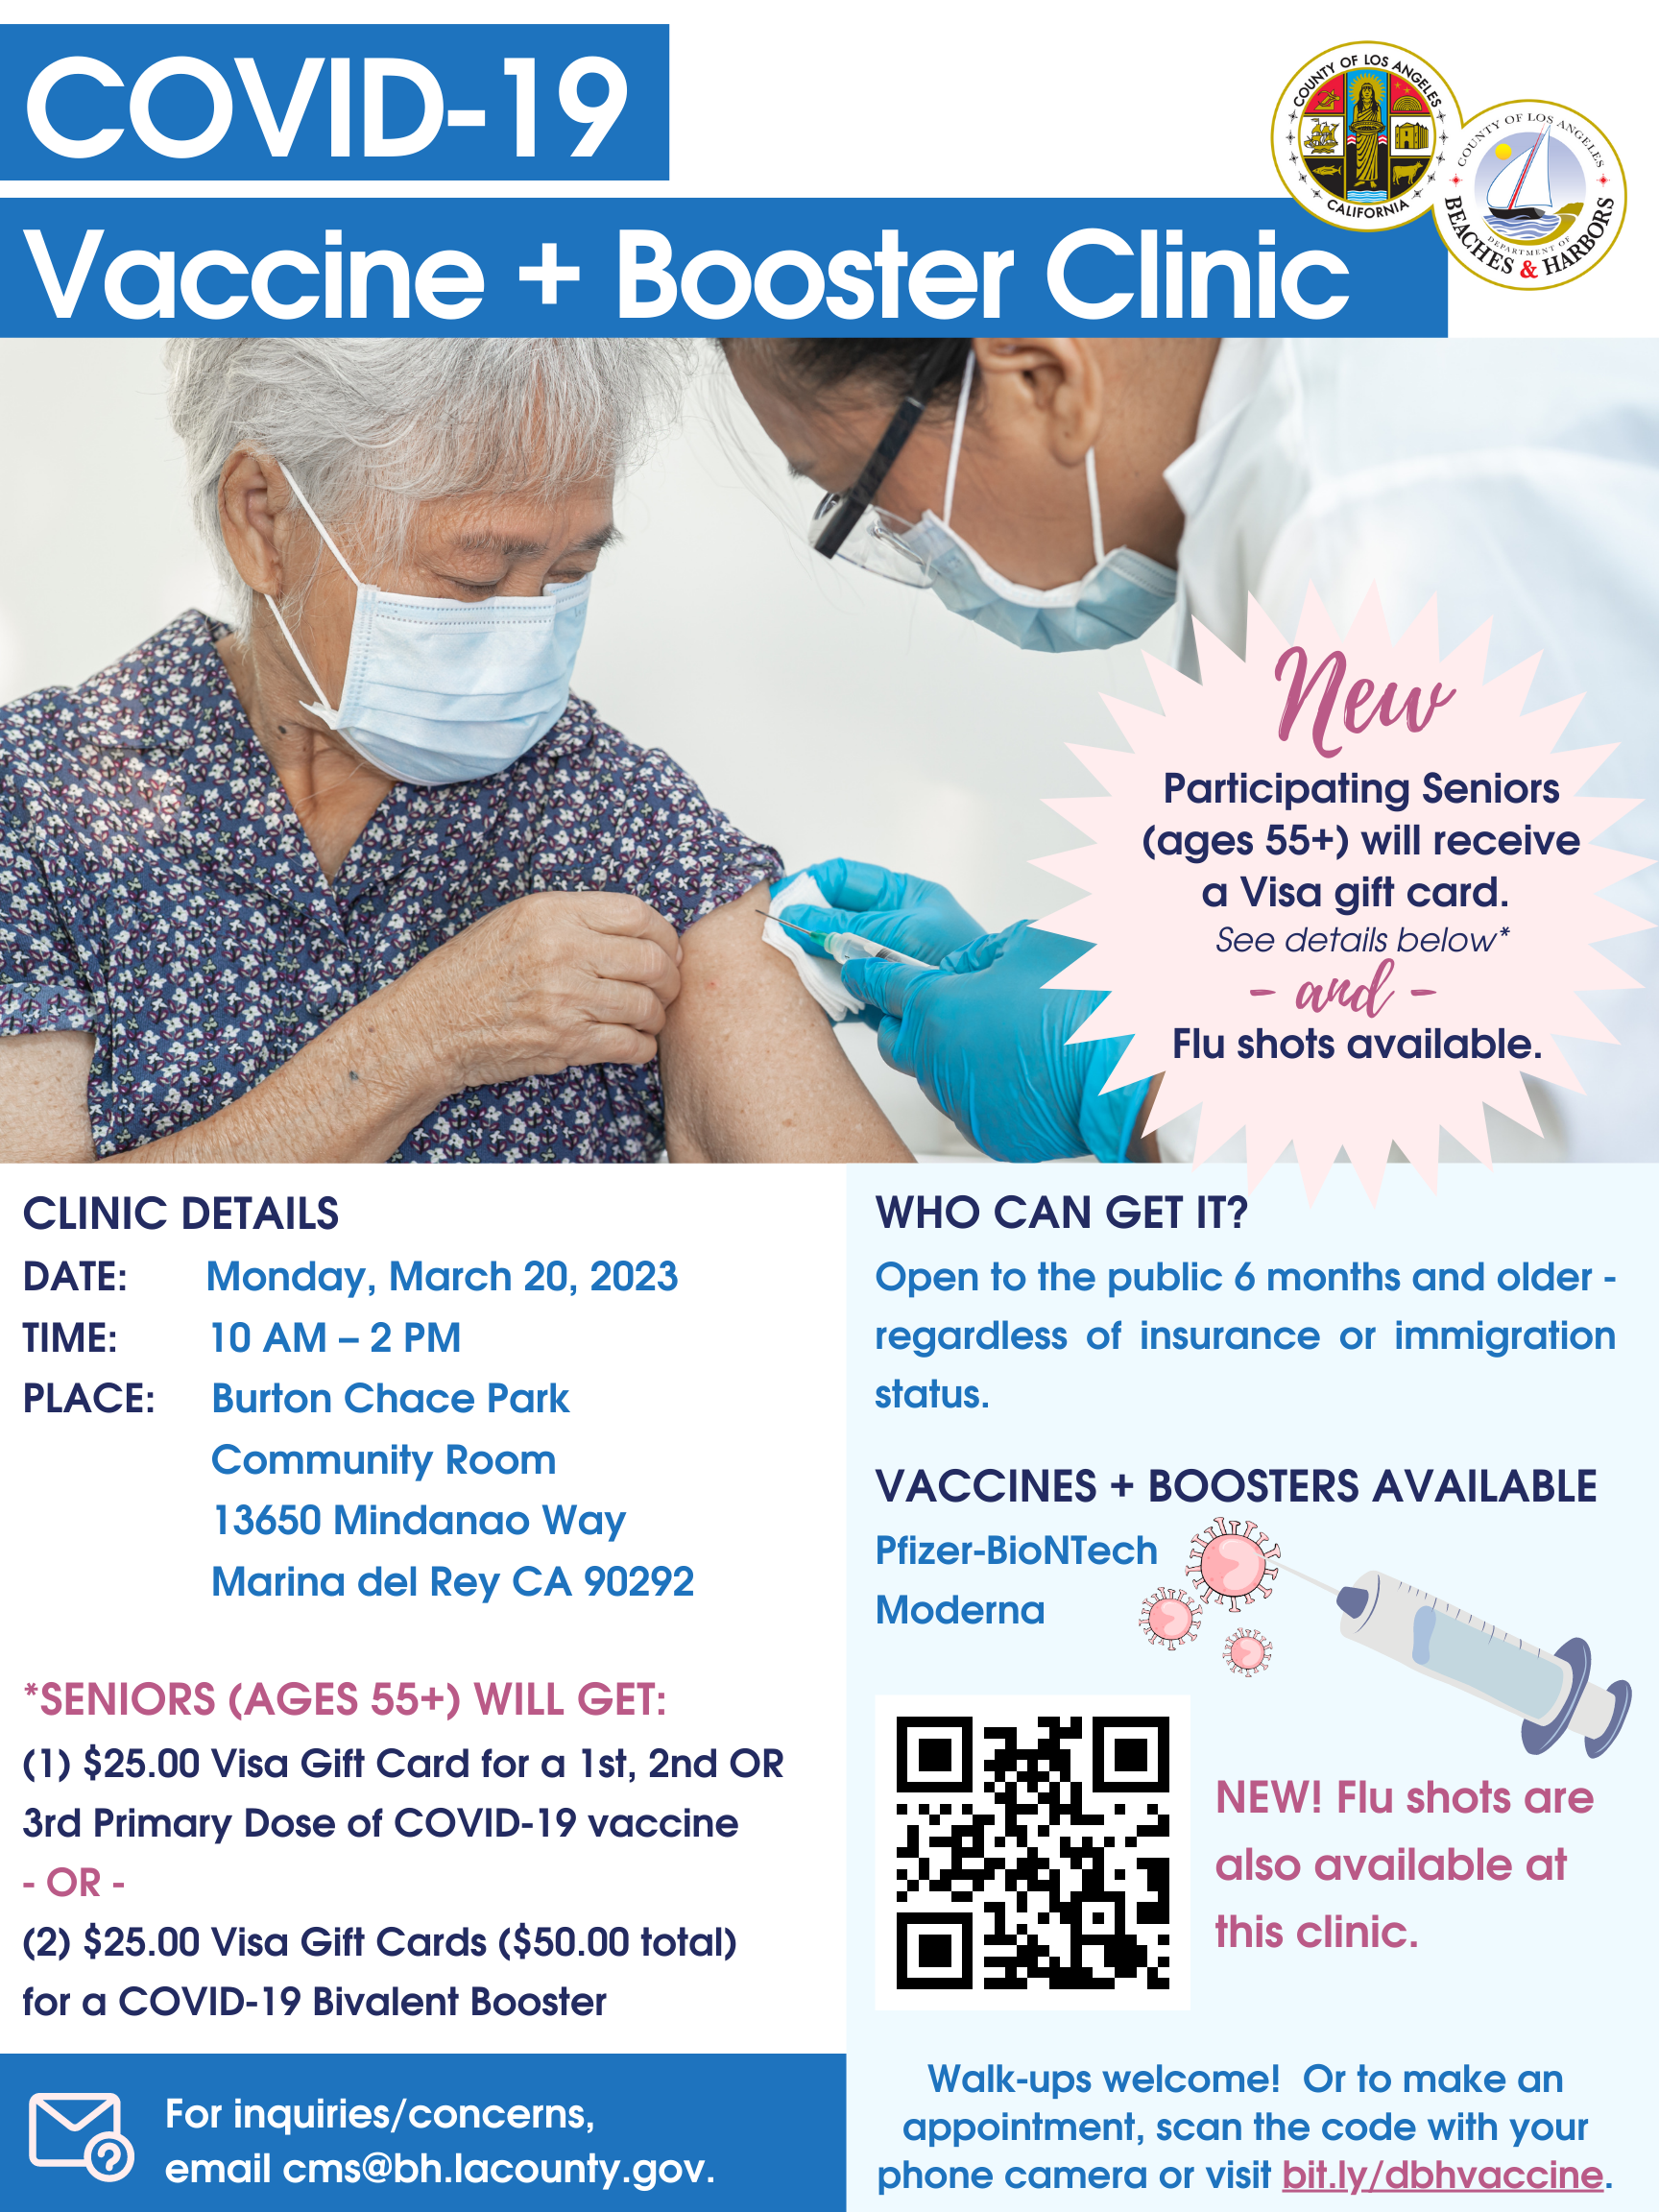 COVID-19 Vaccine and Booster Clinic (March 20)